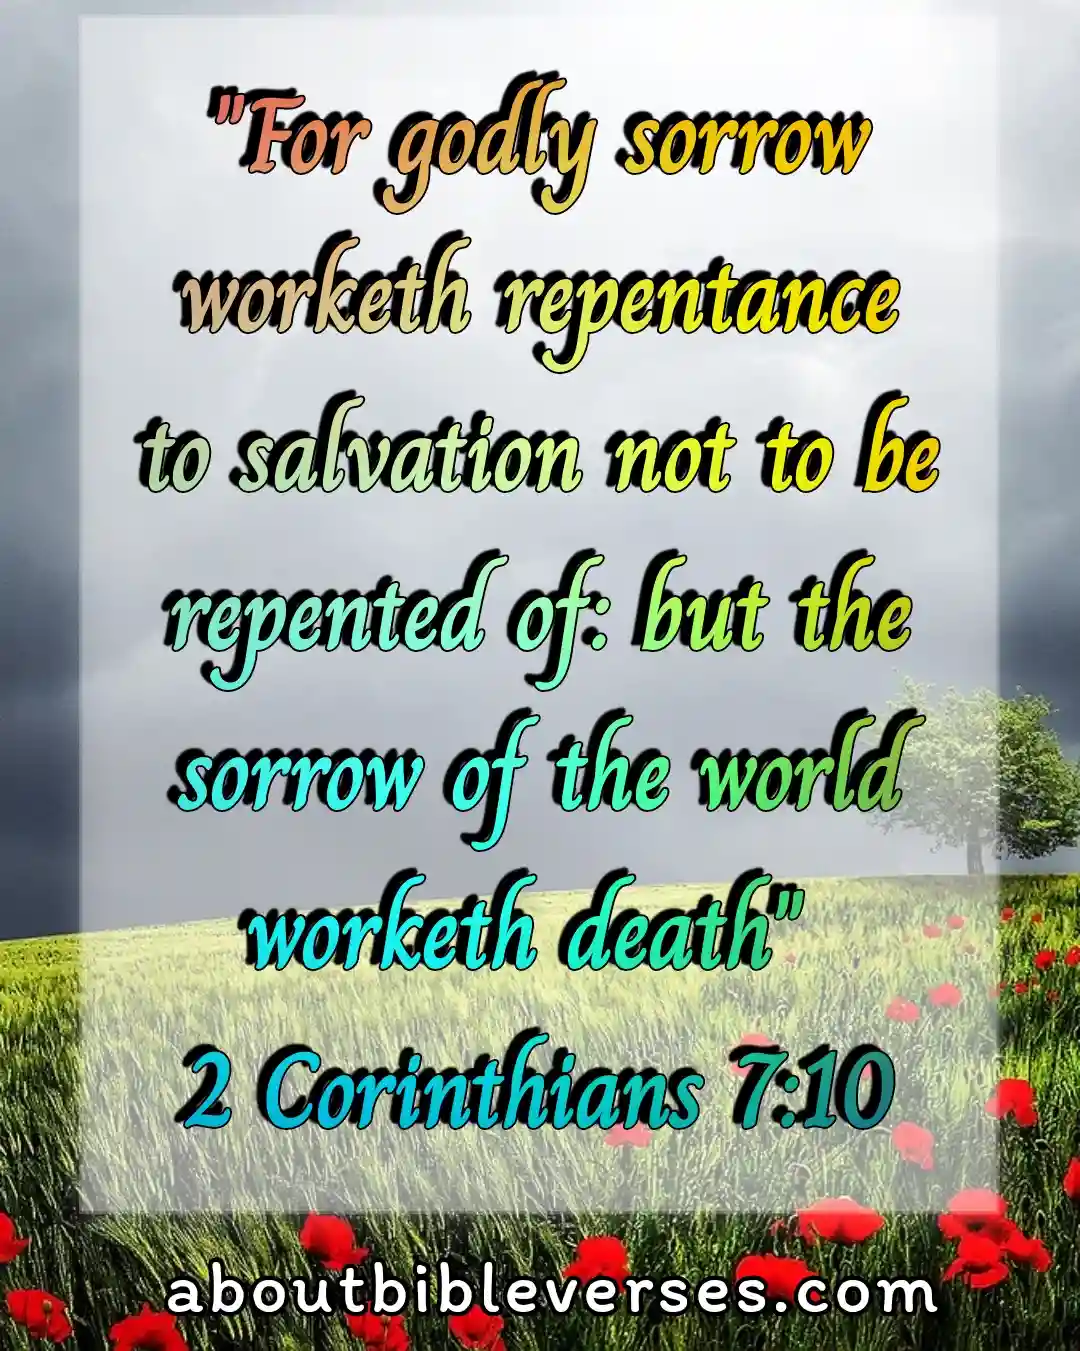 Bible Verses For Repentance And Forgiveness (2 Corinthians 7:10)